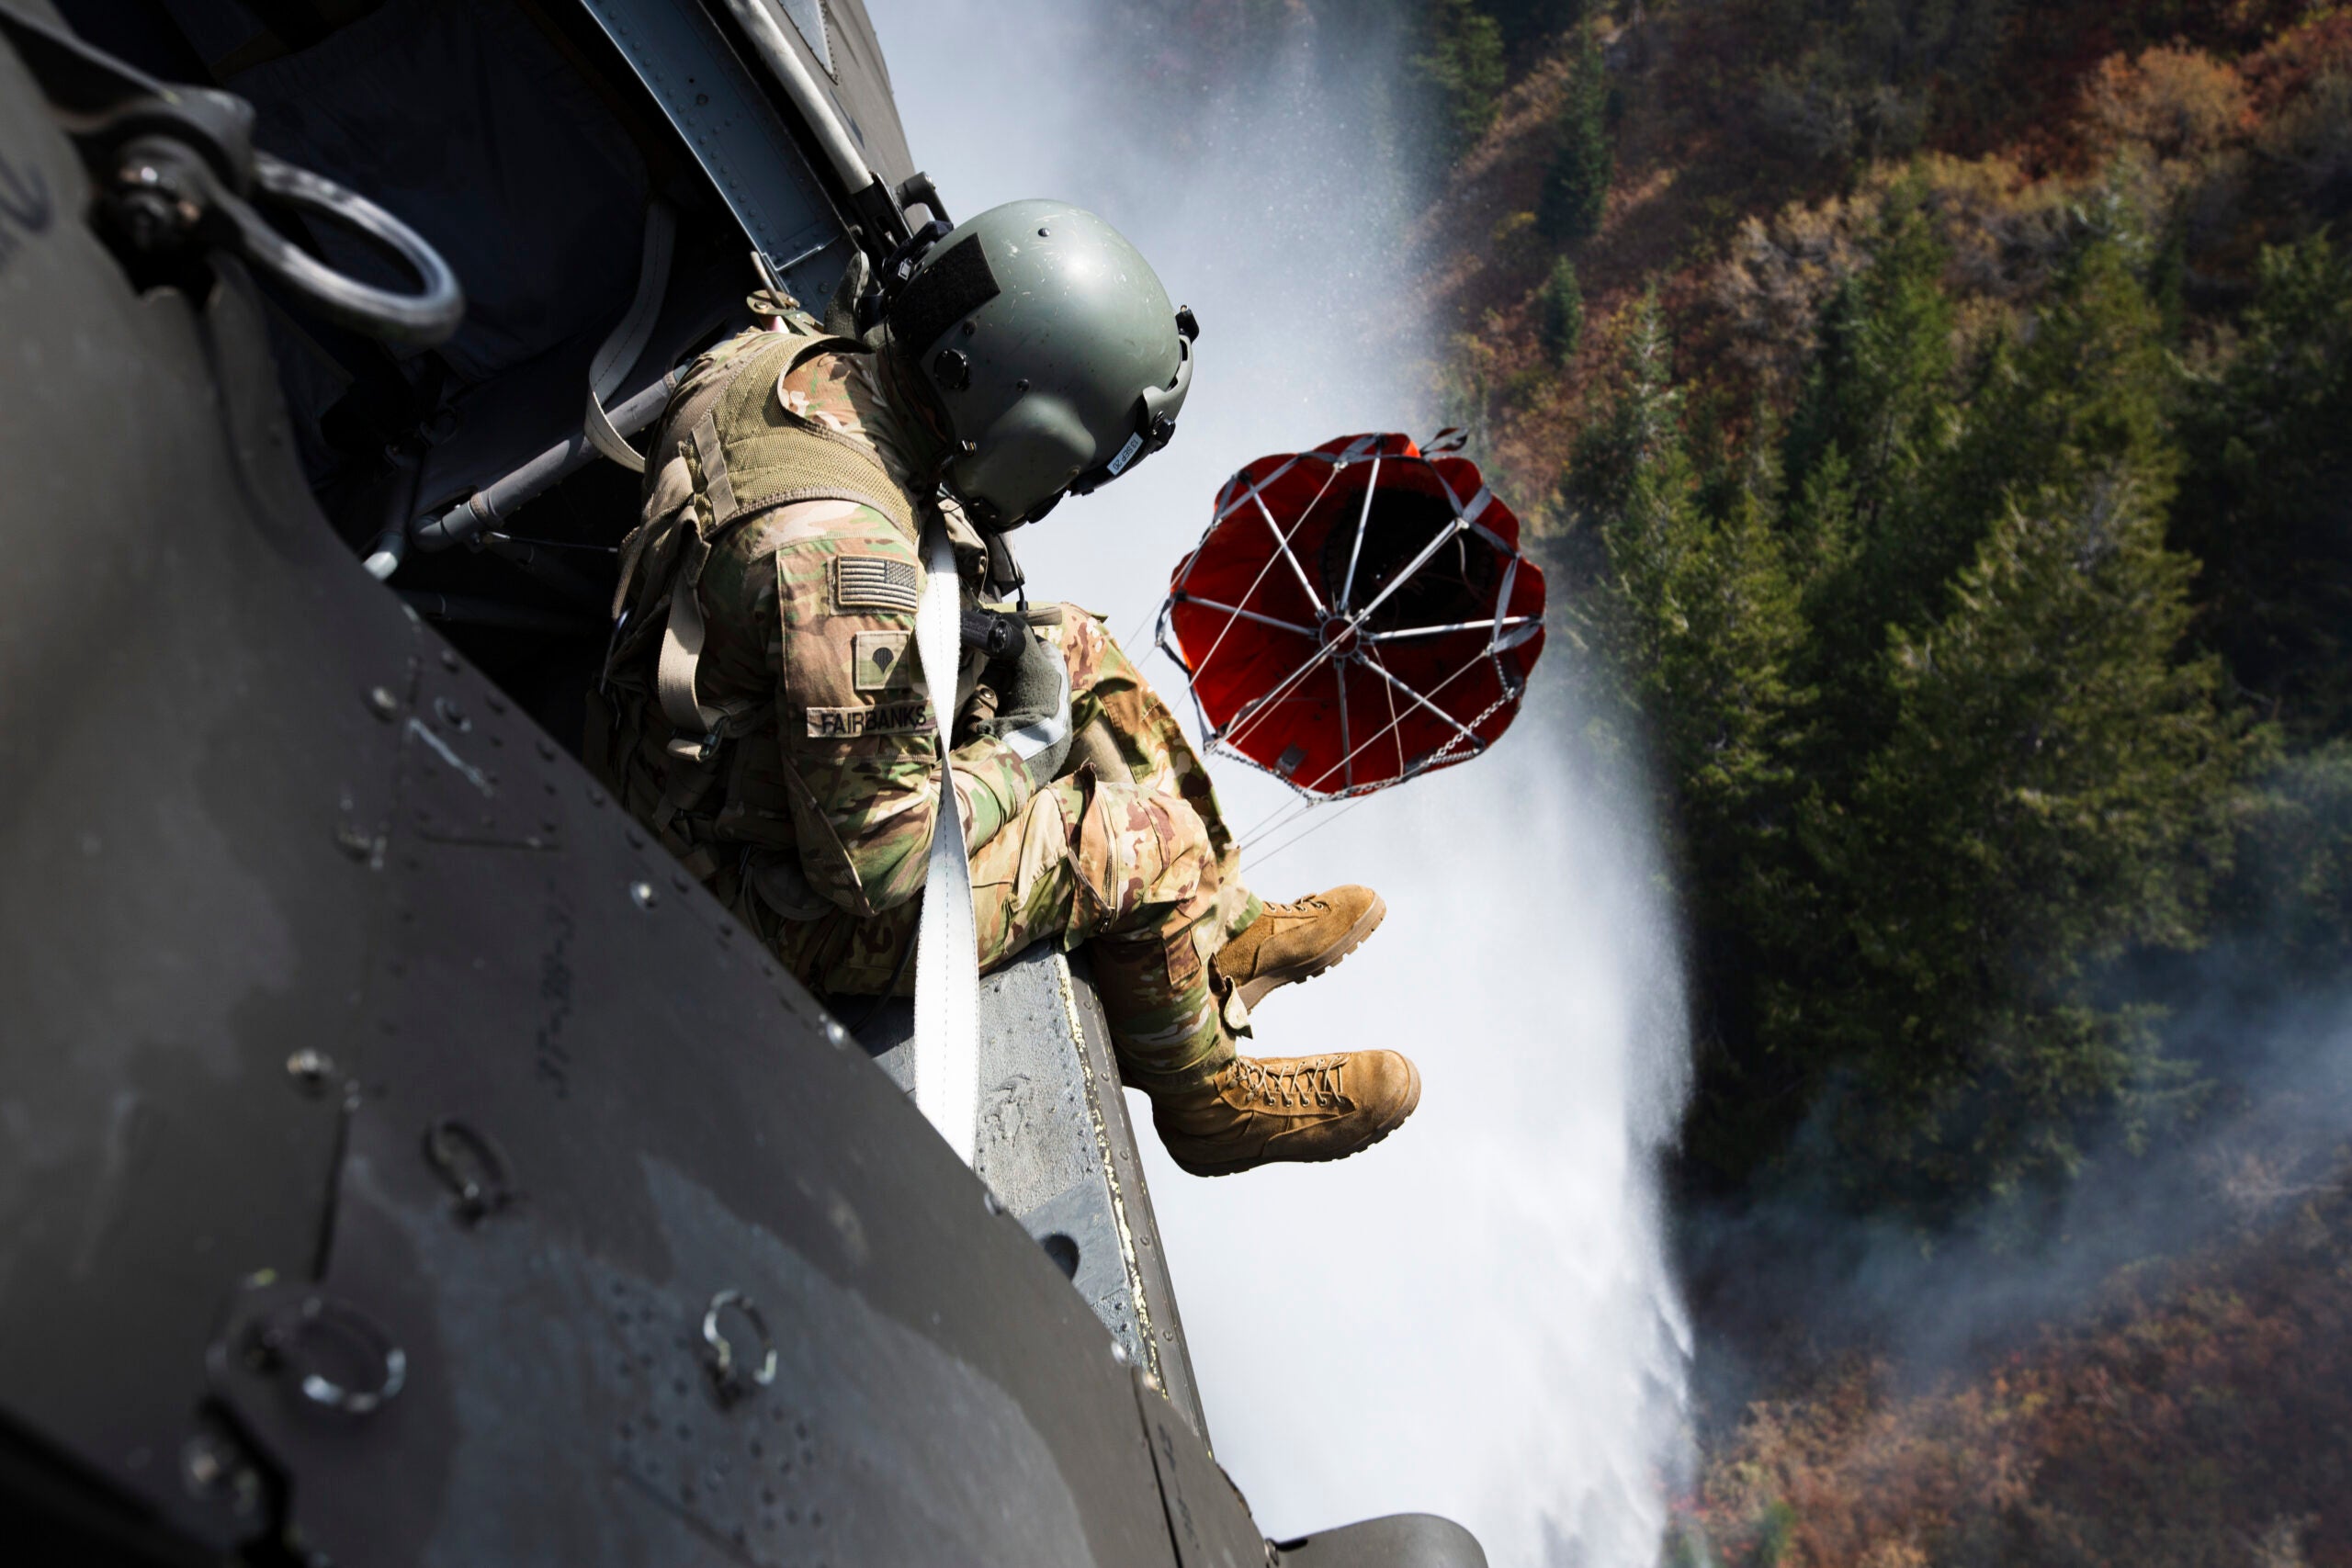 Crew members of the 211th Aviation Regiment conduct air support over the Neffs Canyon fire from a UH-60 Blackhawk helicopter in Salt Lake City, Utah, 20 September 2020. The Blackhawk can drop 600 gallons of water over a wildfire each drop. (U.S. National Guard Photo by Spc. Jacob Jesperson)